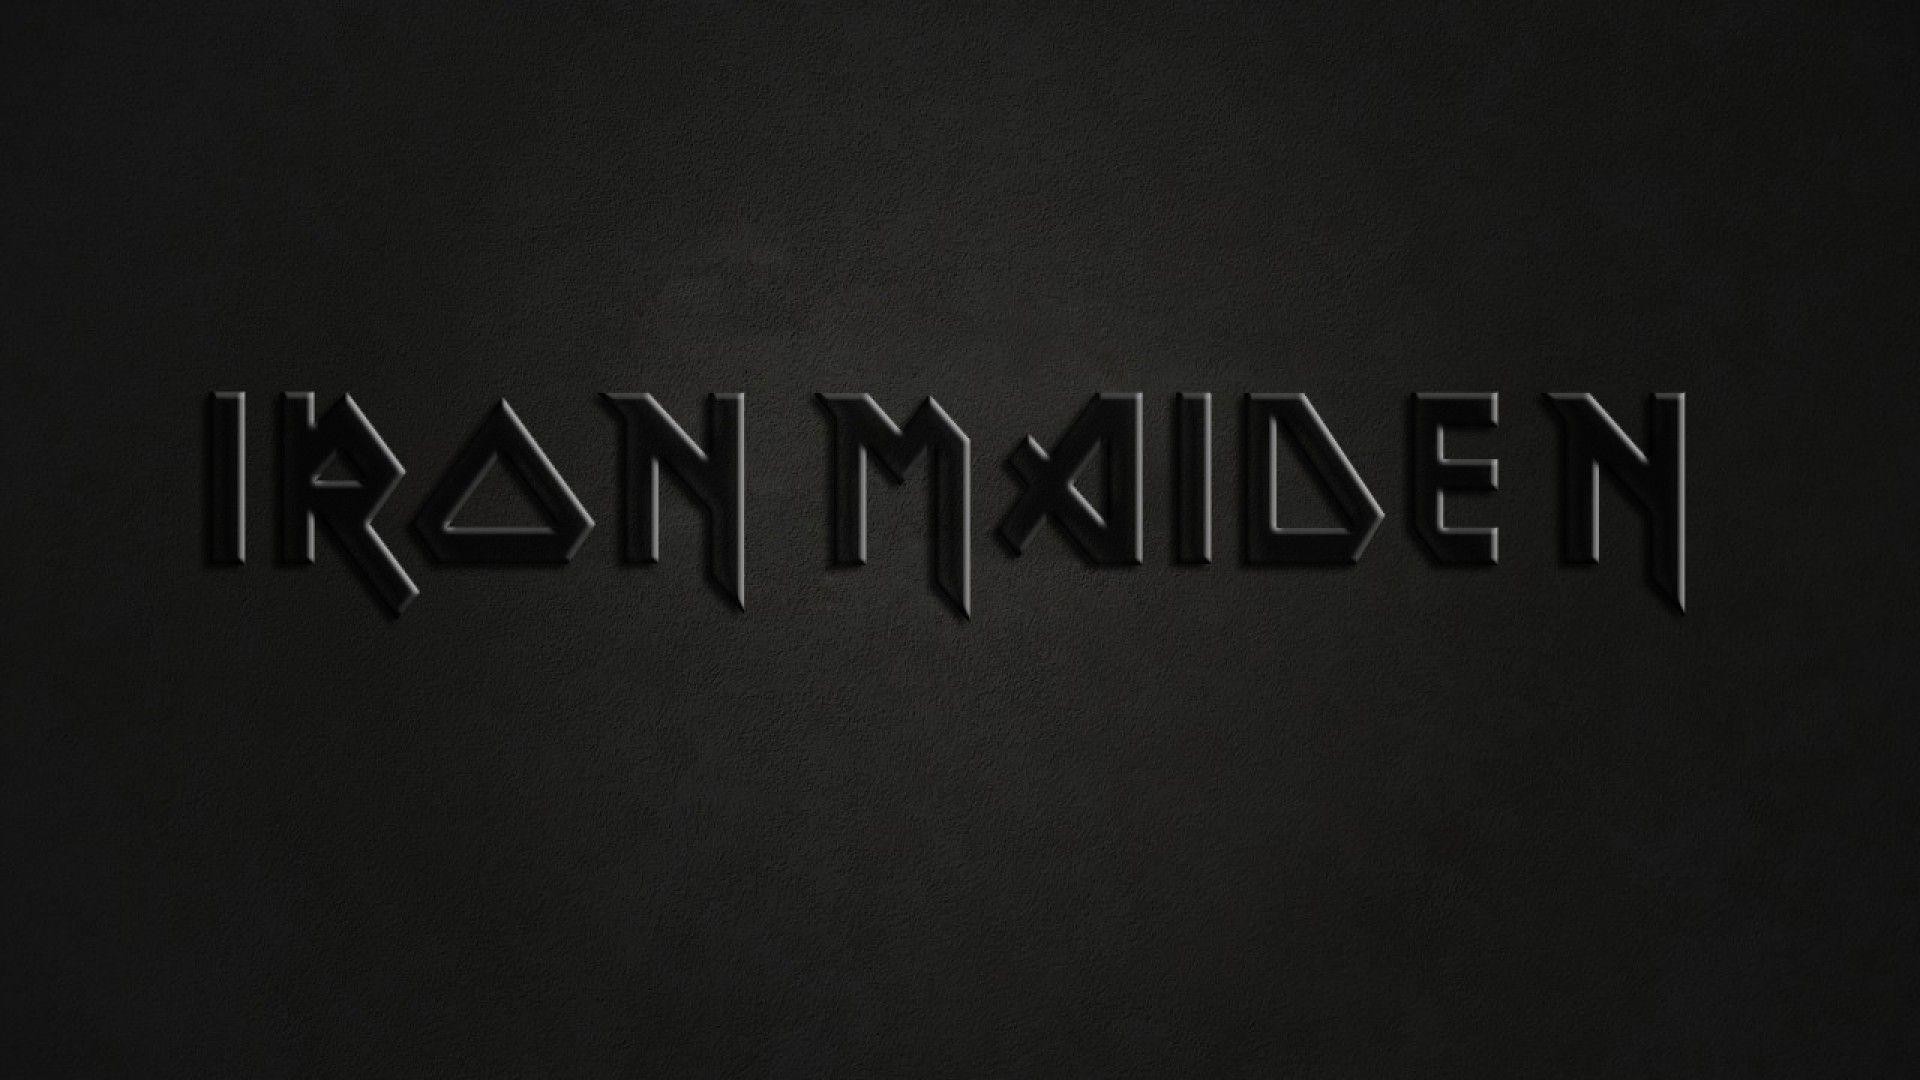 Full HD 1080p Iron maiden Wallpapers HD,